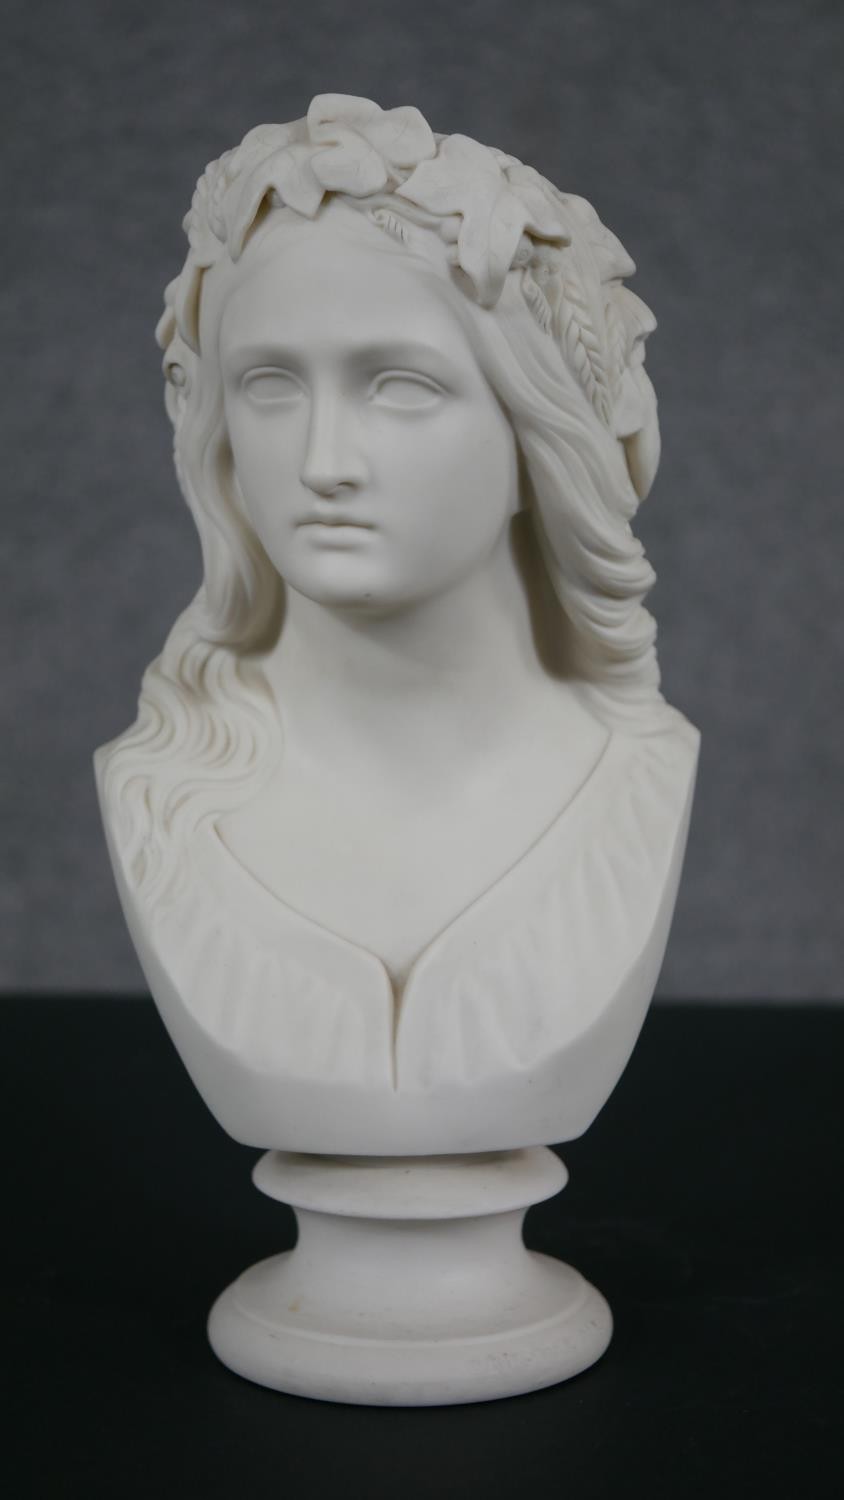 A W.T. Copeland Parian bust of ‘Ophelia; Modelled by ‘W.C. Marshall. Inscribed ‘Crystal Palace